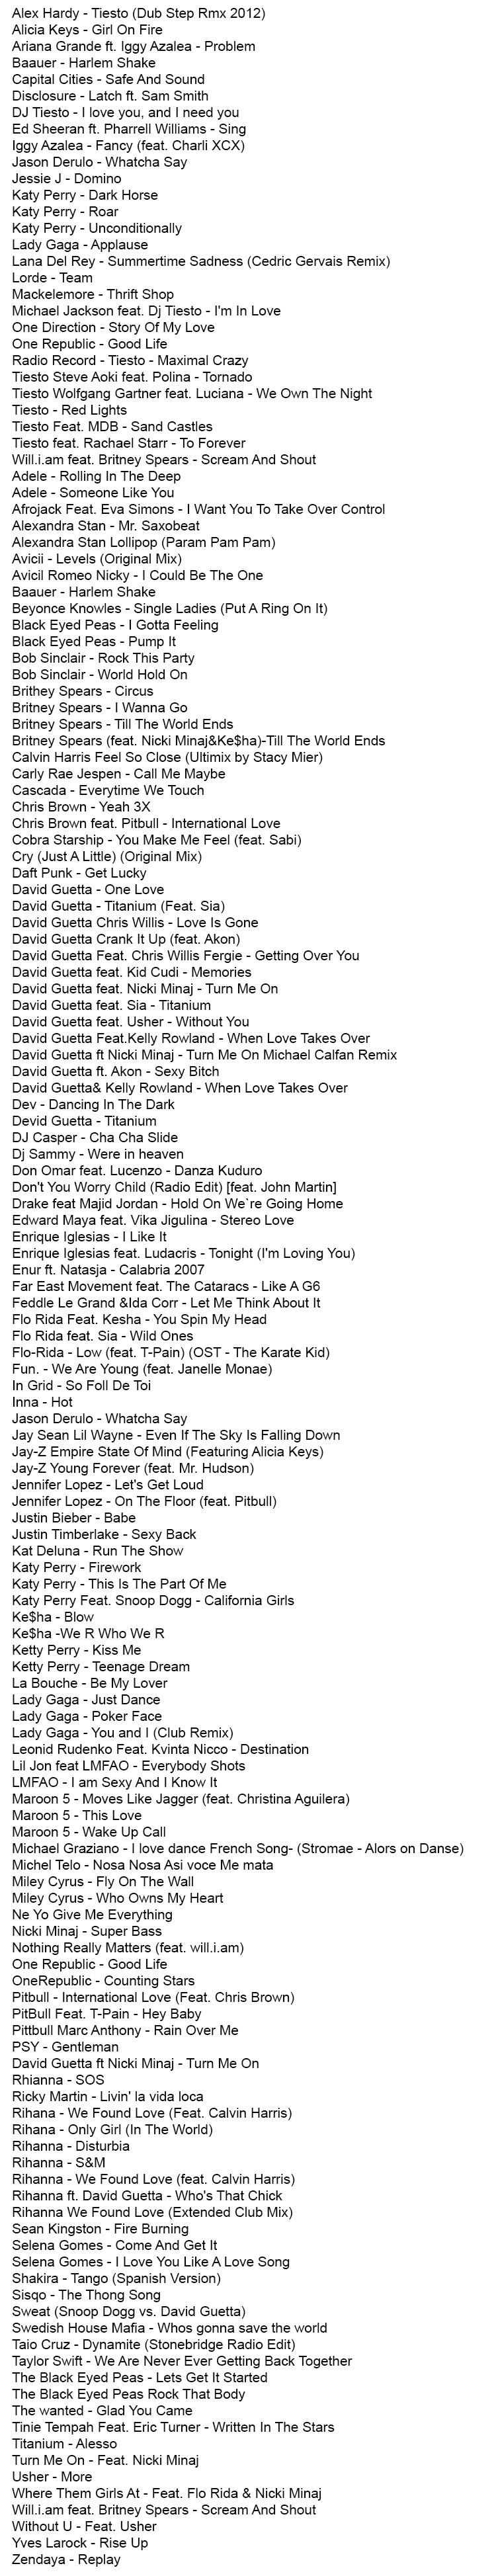 Russian DJ Song List Most Requested American and international songs updated March 16, 2016